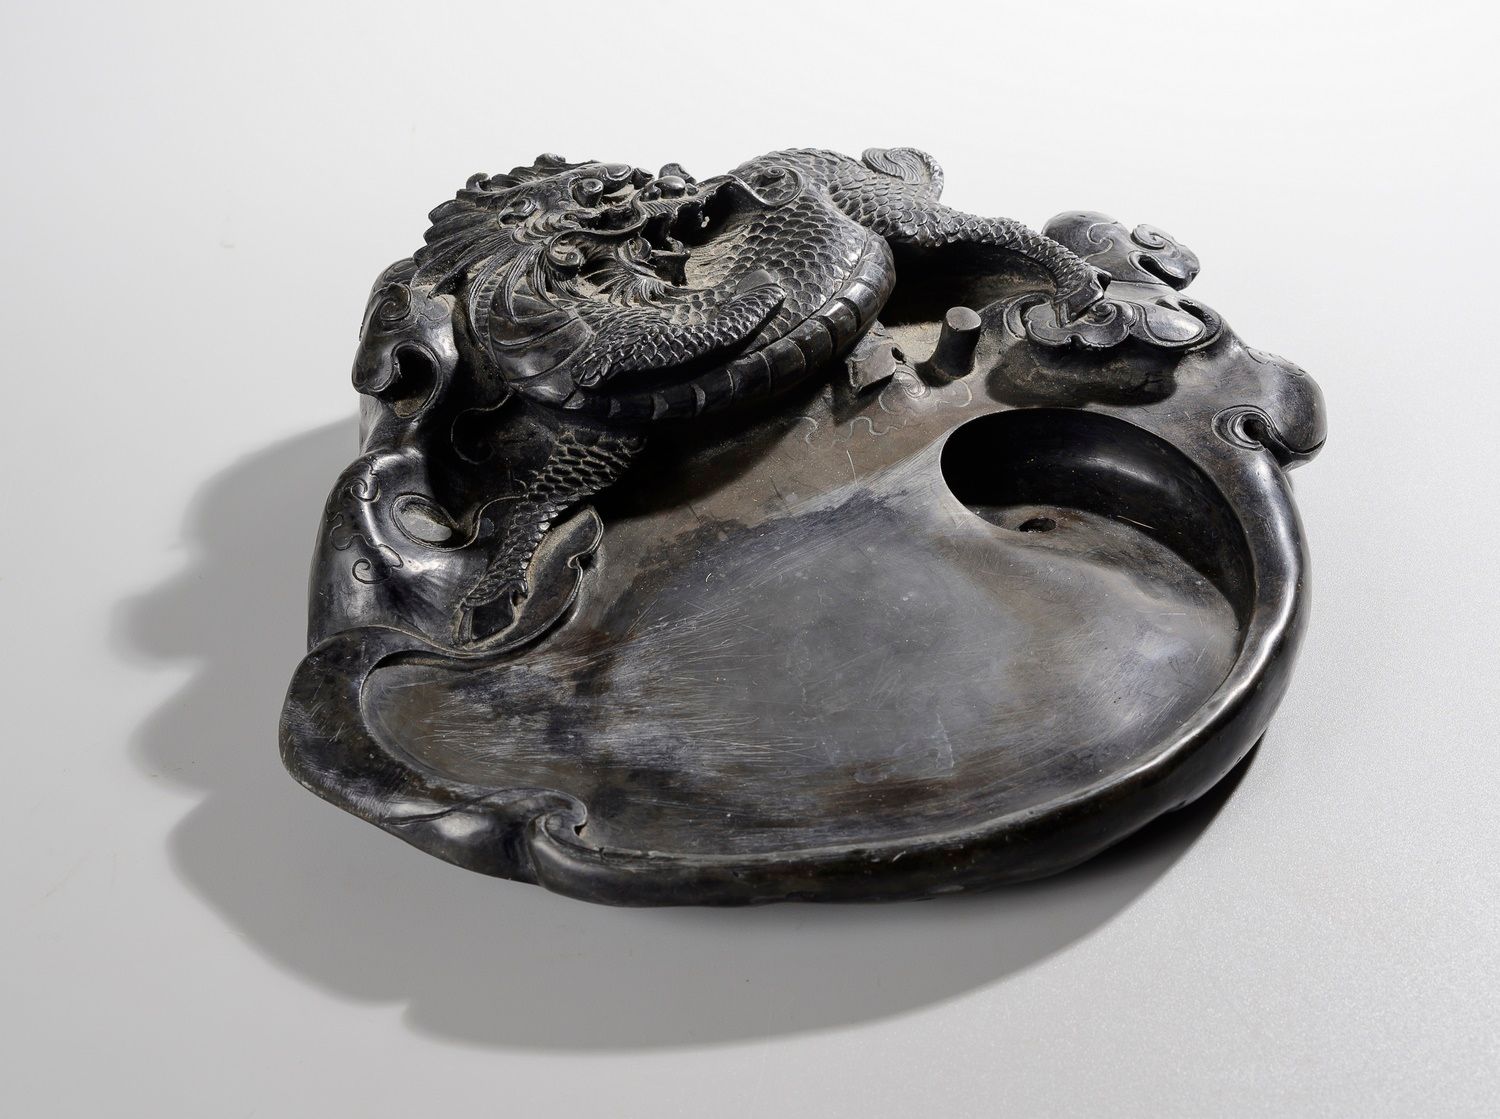 Null CHINA, 20th century

An inkwell with a dragon decoration 

25 x 27 cm.